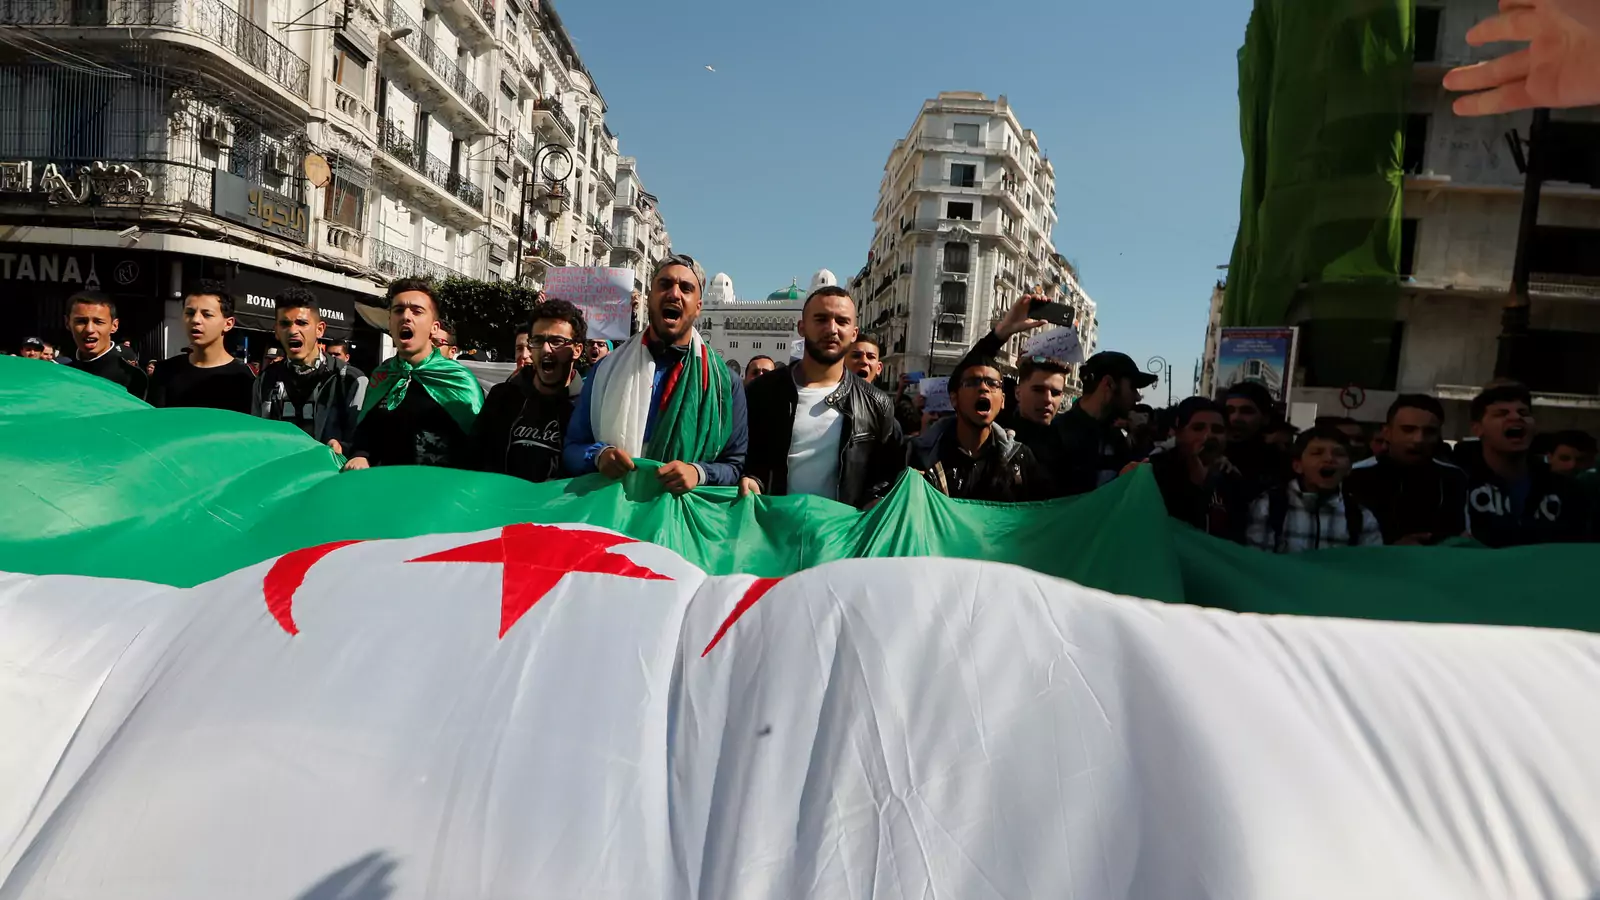 People take part in a protest demanding immediate political change in Algiers, Algeria March 12, 2019